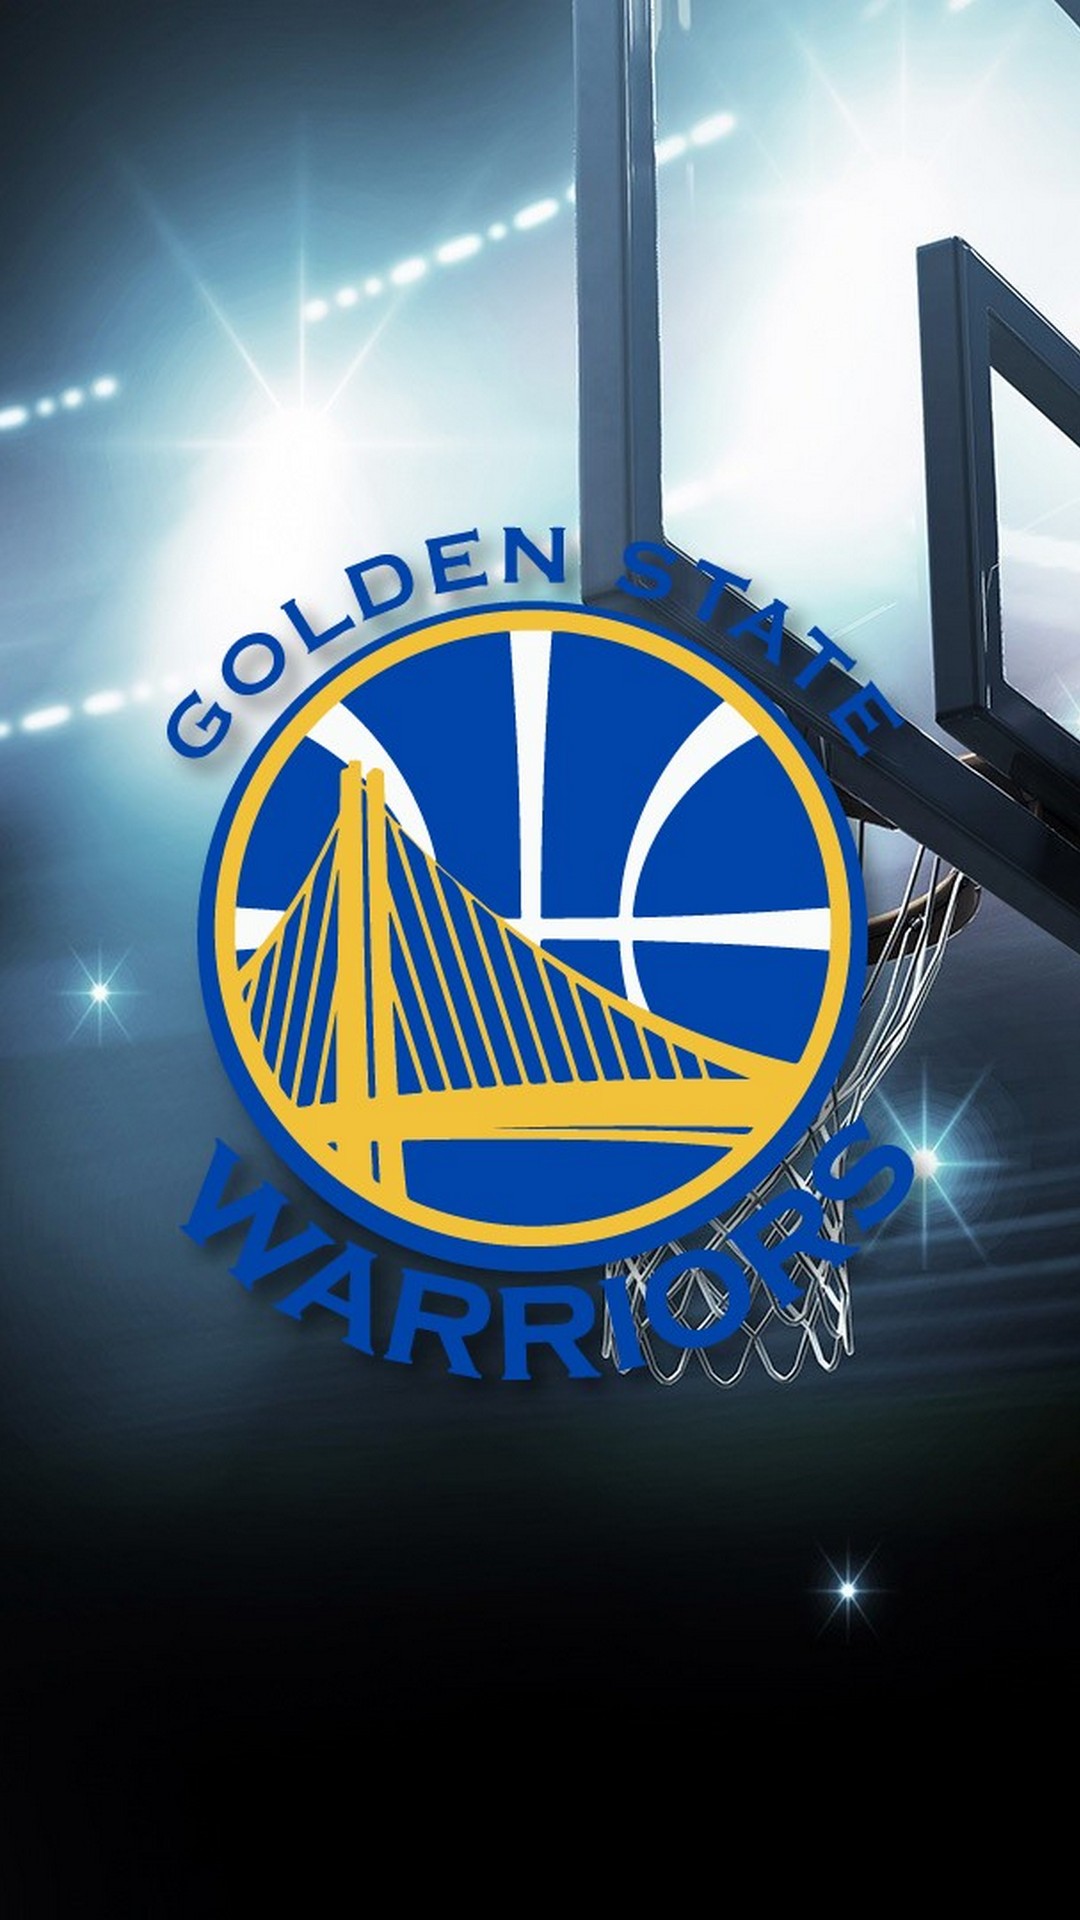 Golden State Warriors Wallpaper iPhone HD with image resolution 1080x1920 pixel. You can use this wallpaper as background for your desktop Computer Screensavers, Android or iPhone smartphones